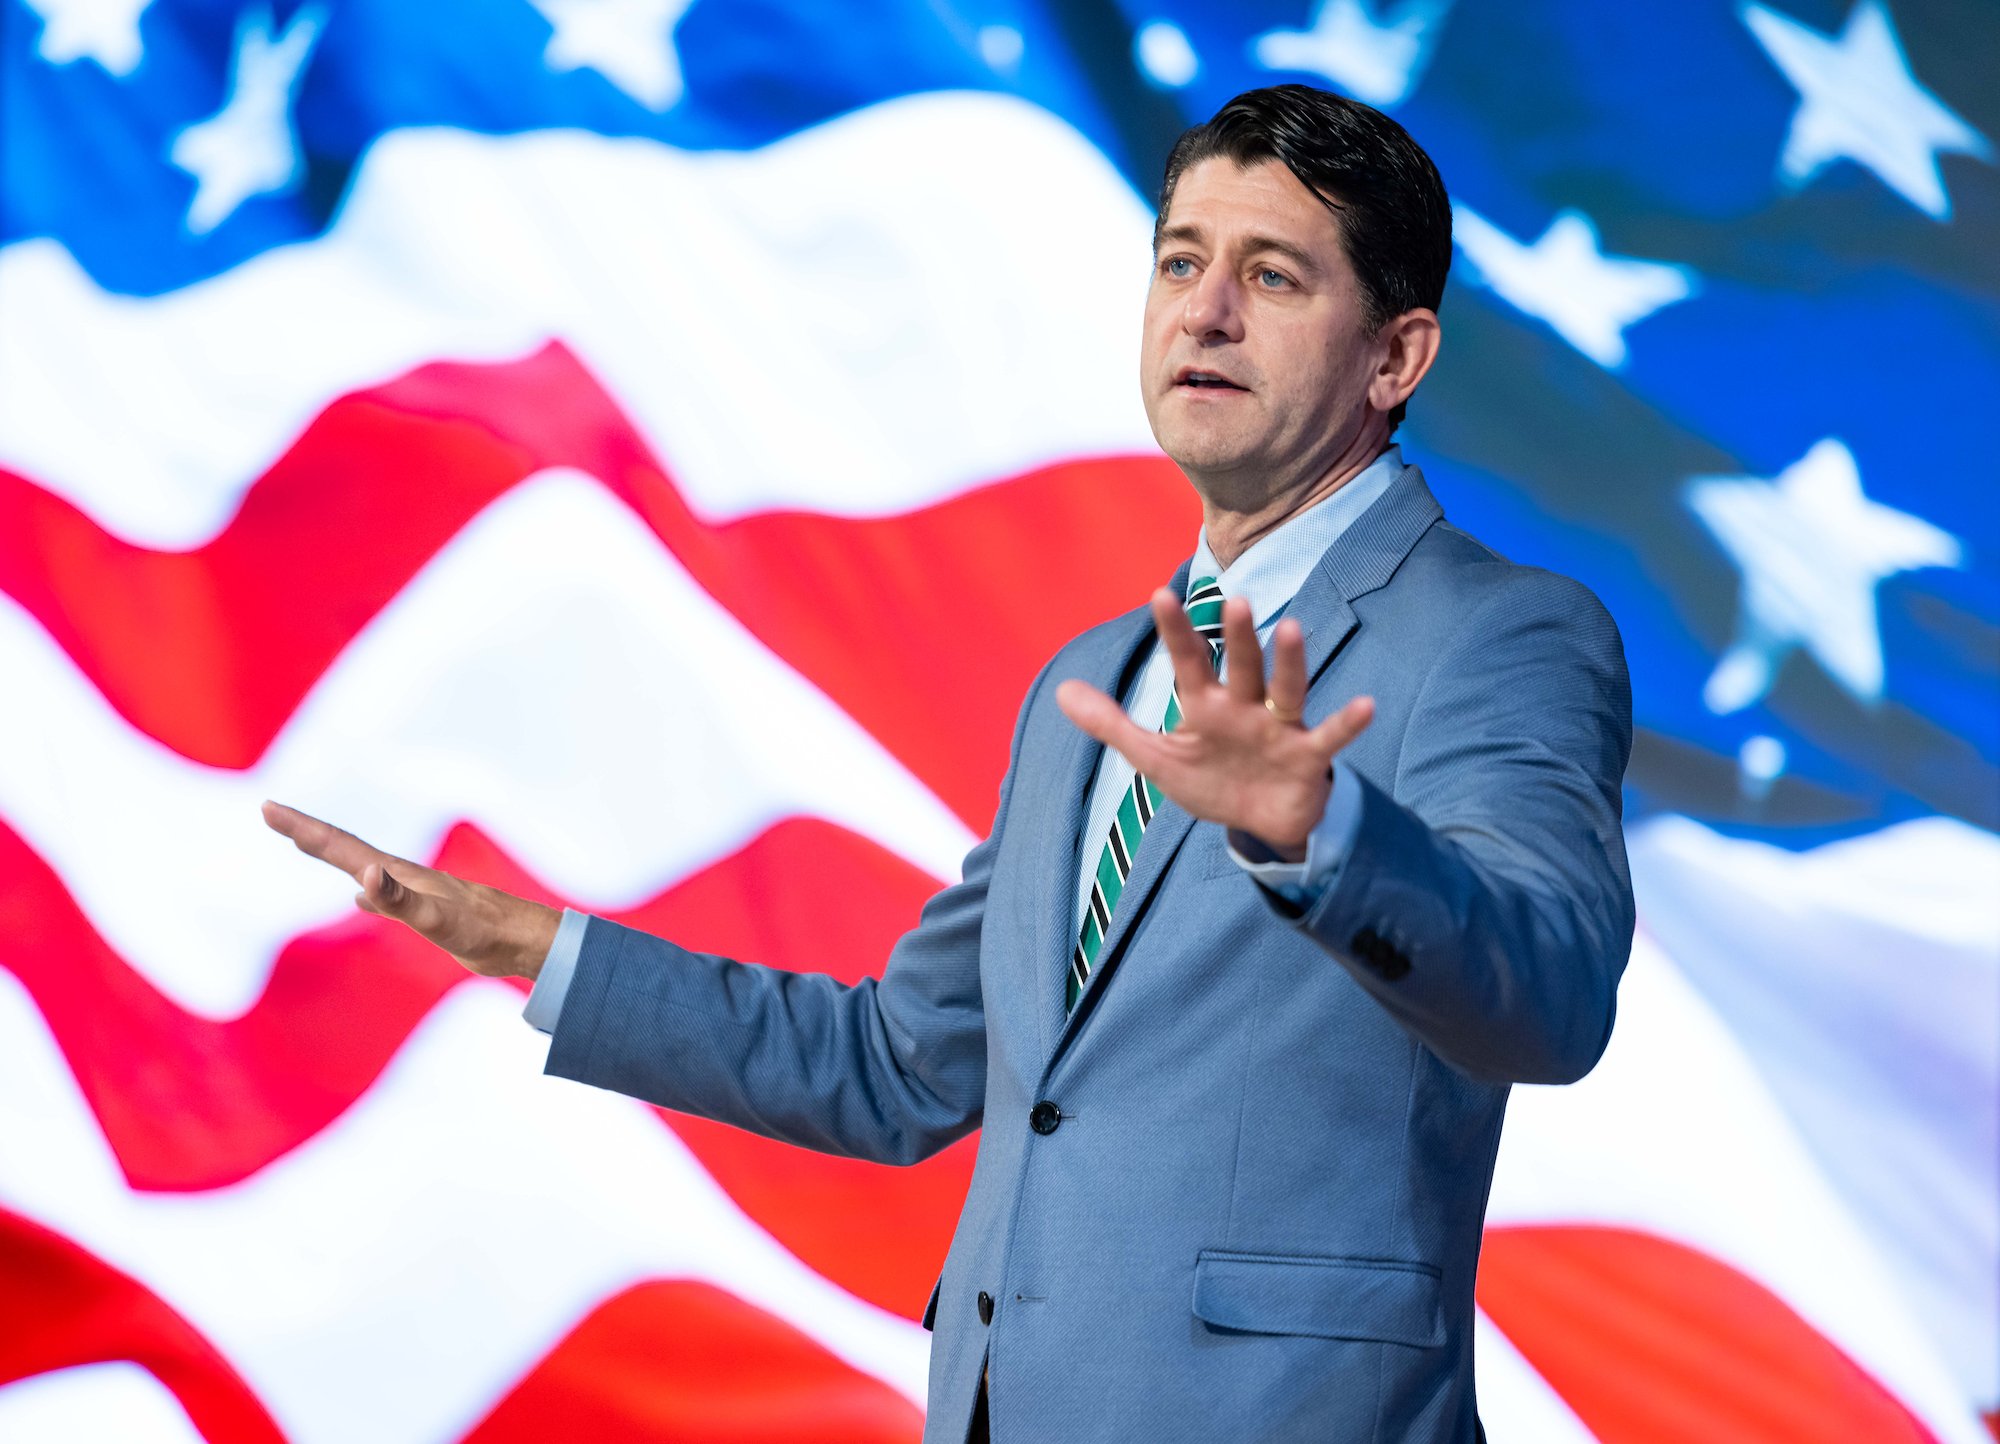 Paul Ryan on stage at UVU with a US Flag background